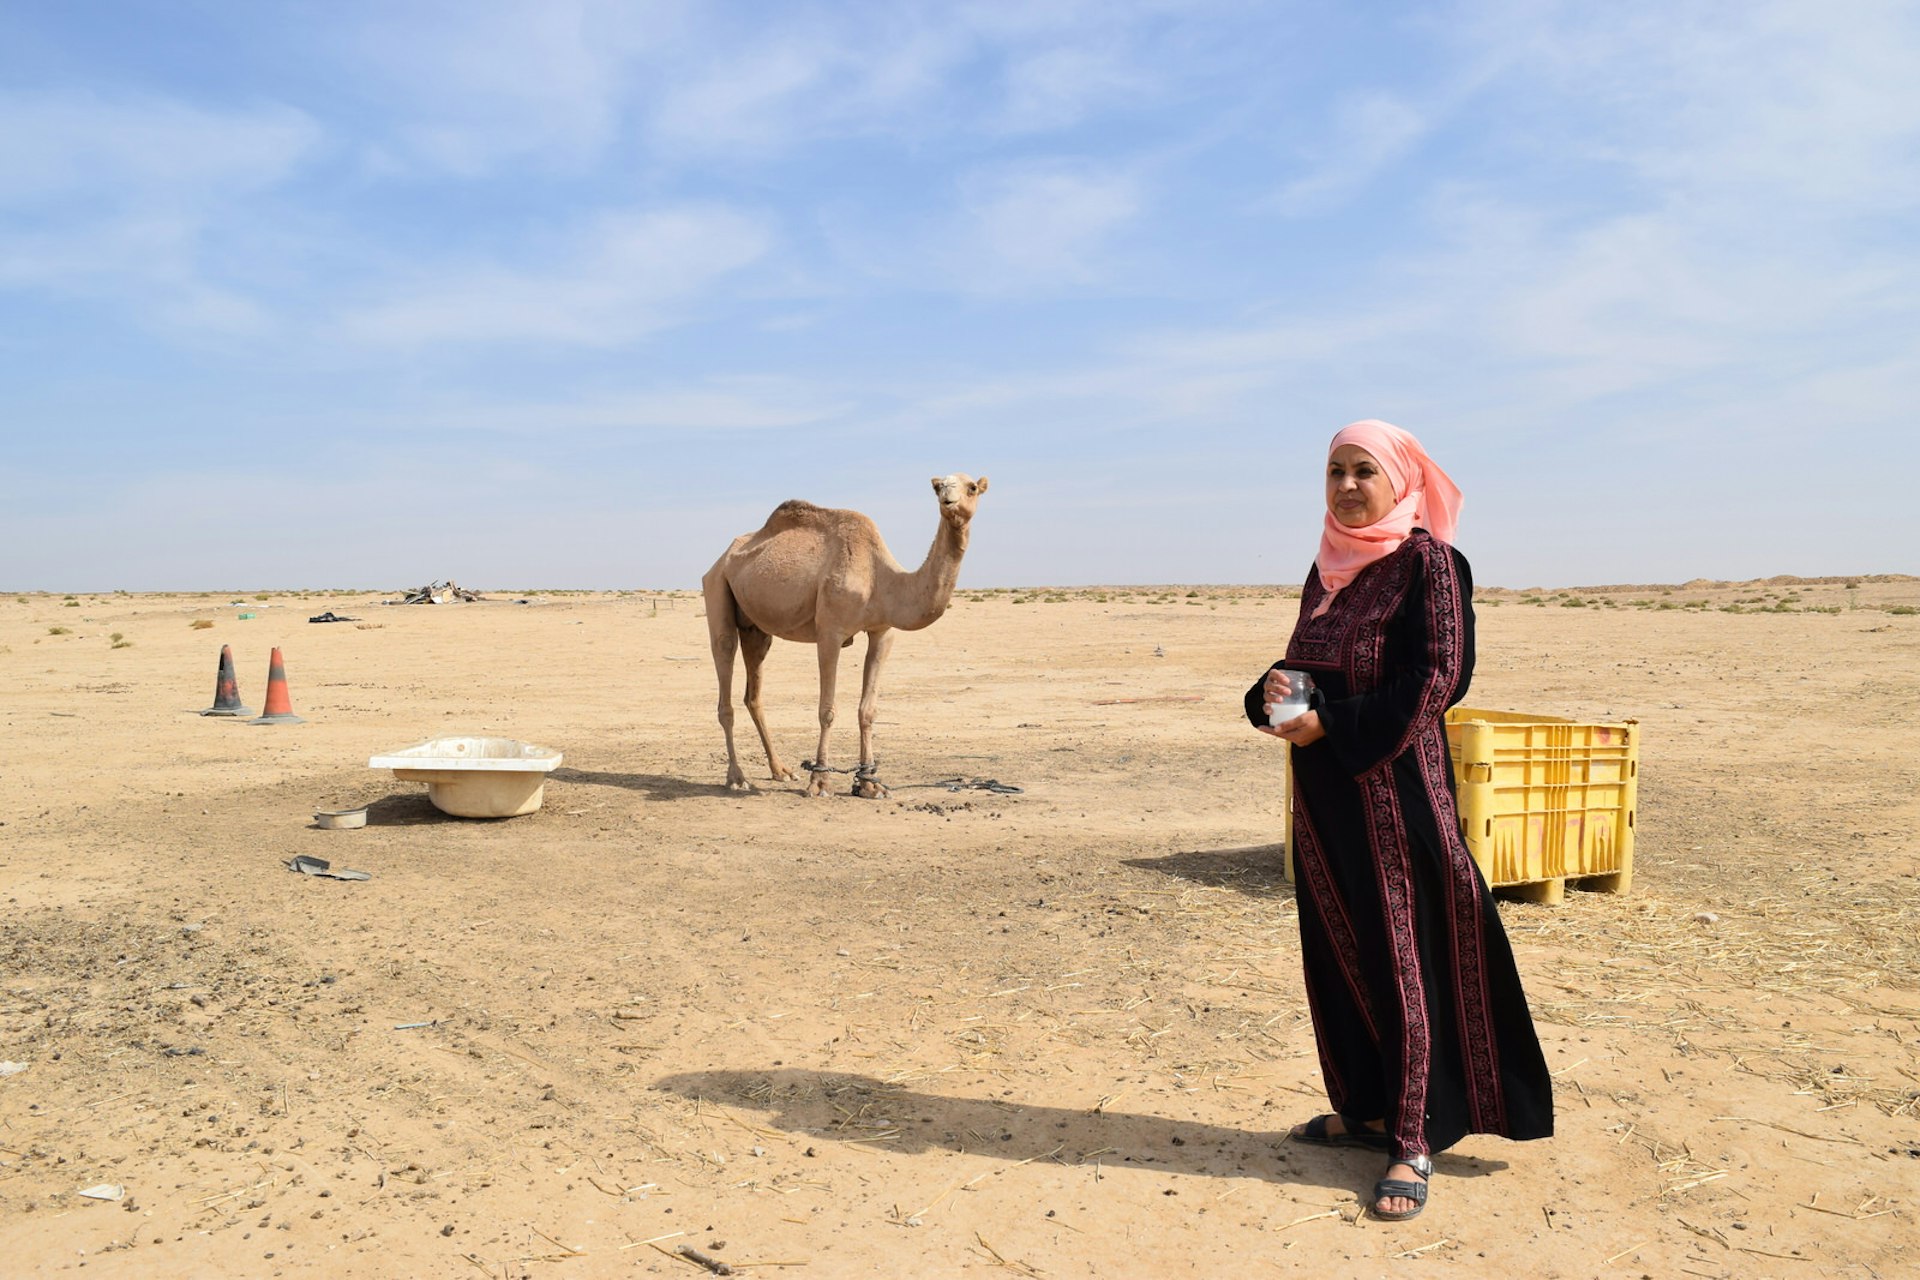 Mariam Abu Rkeek, founder of Desert Daughter, holds a jar of camel milk with a camel in the background in the Negev desert, Israel